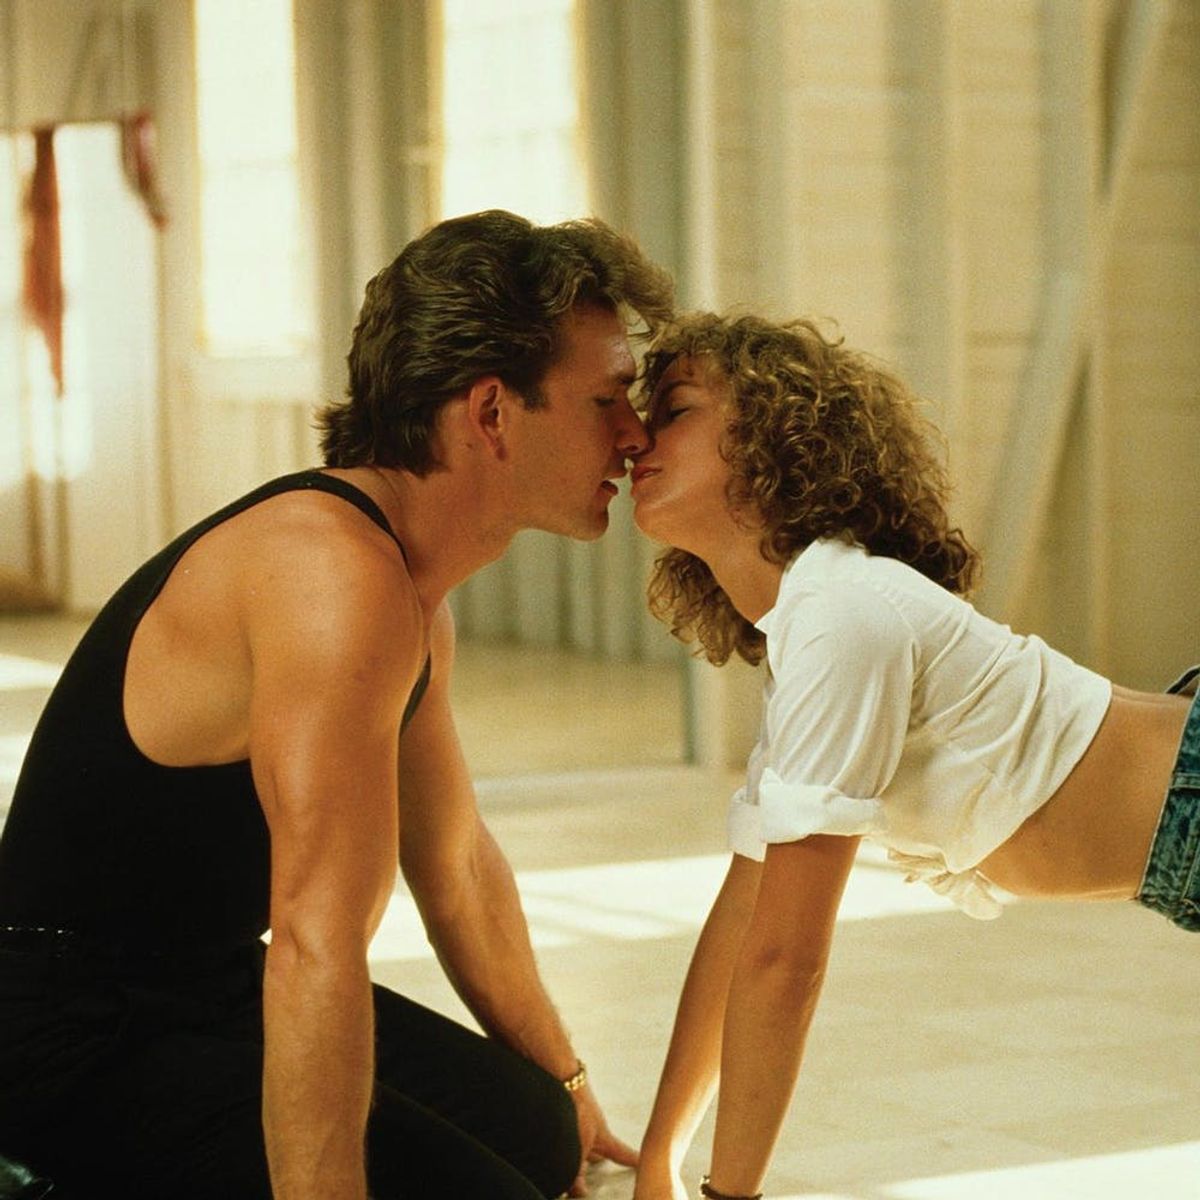 This Summer Rental Is Every Dirty Dancing Fan’s Dream Come True